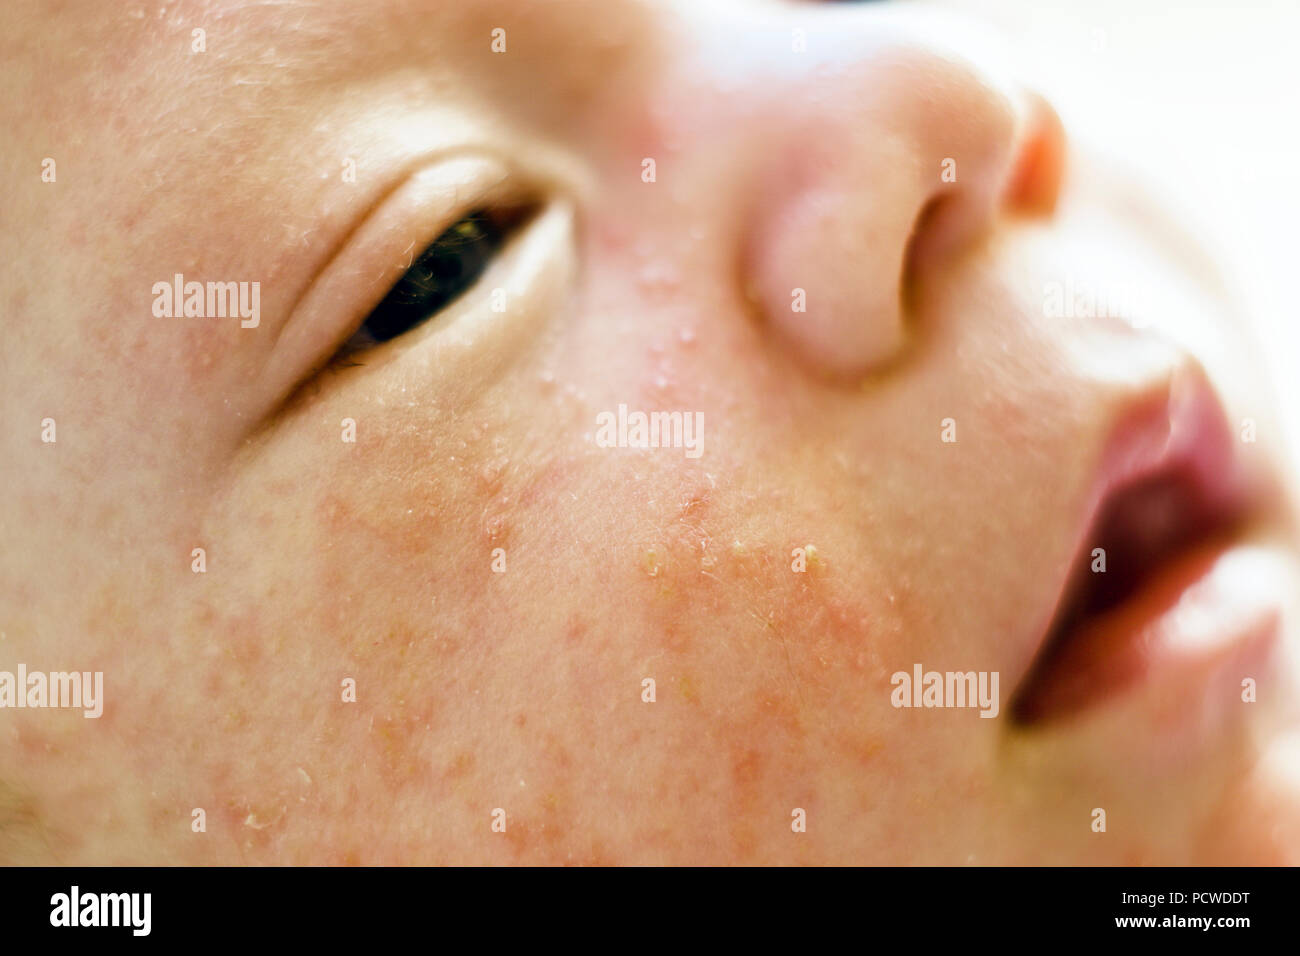 Newborn baby boy face with many pimples caused by atopic dermatitis Stock Photo